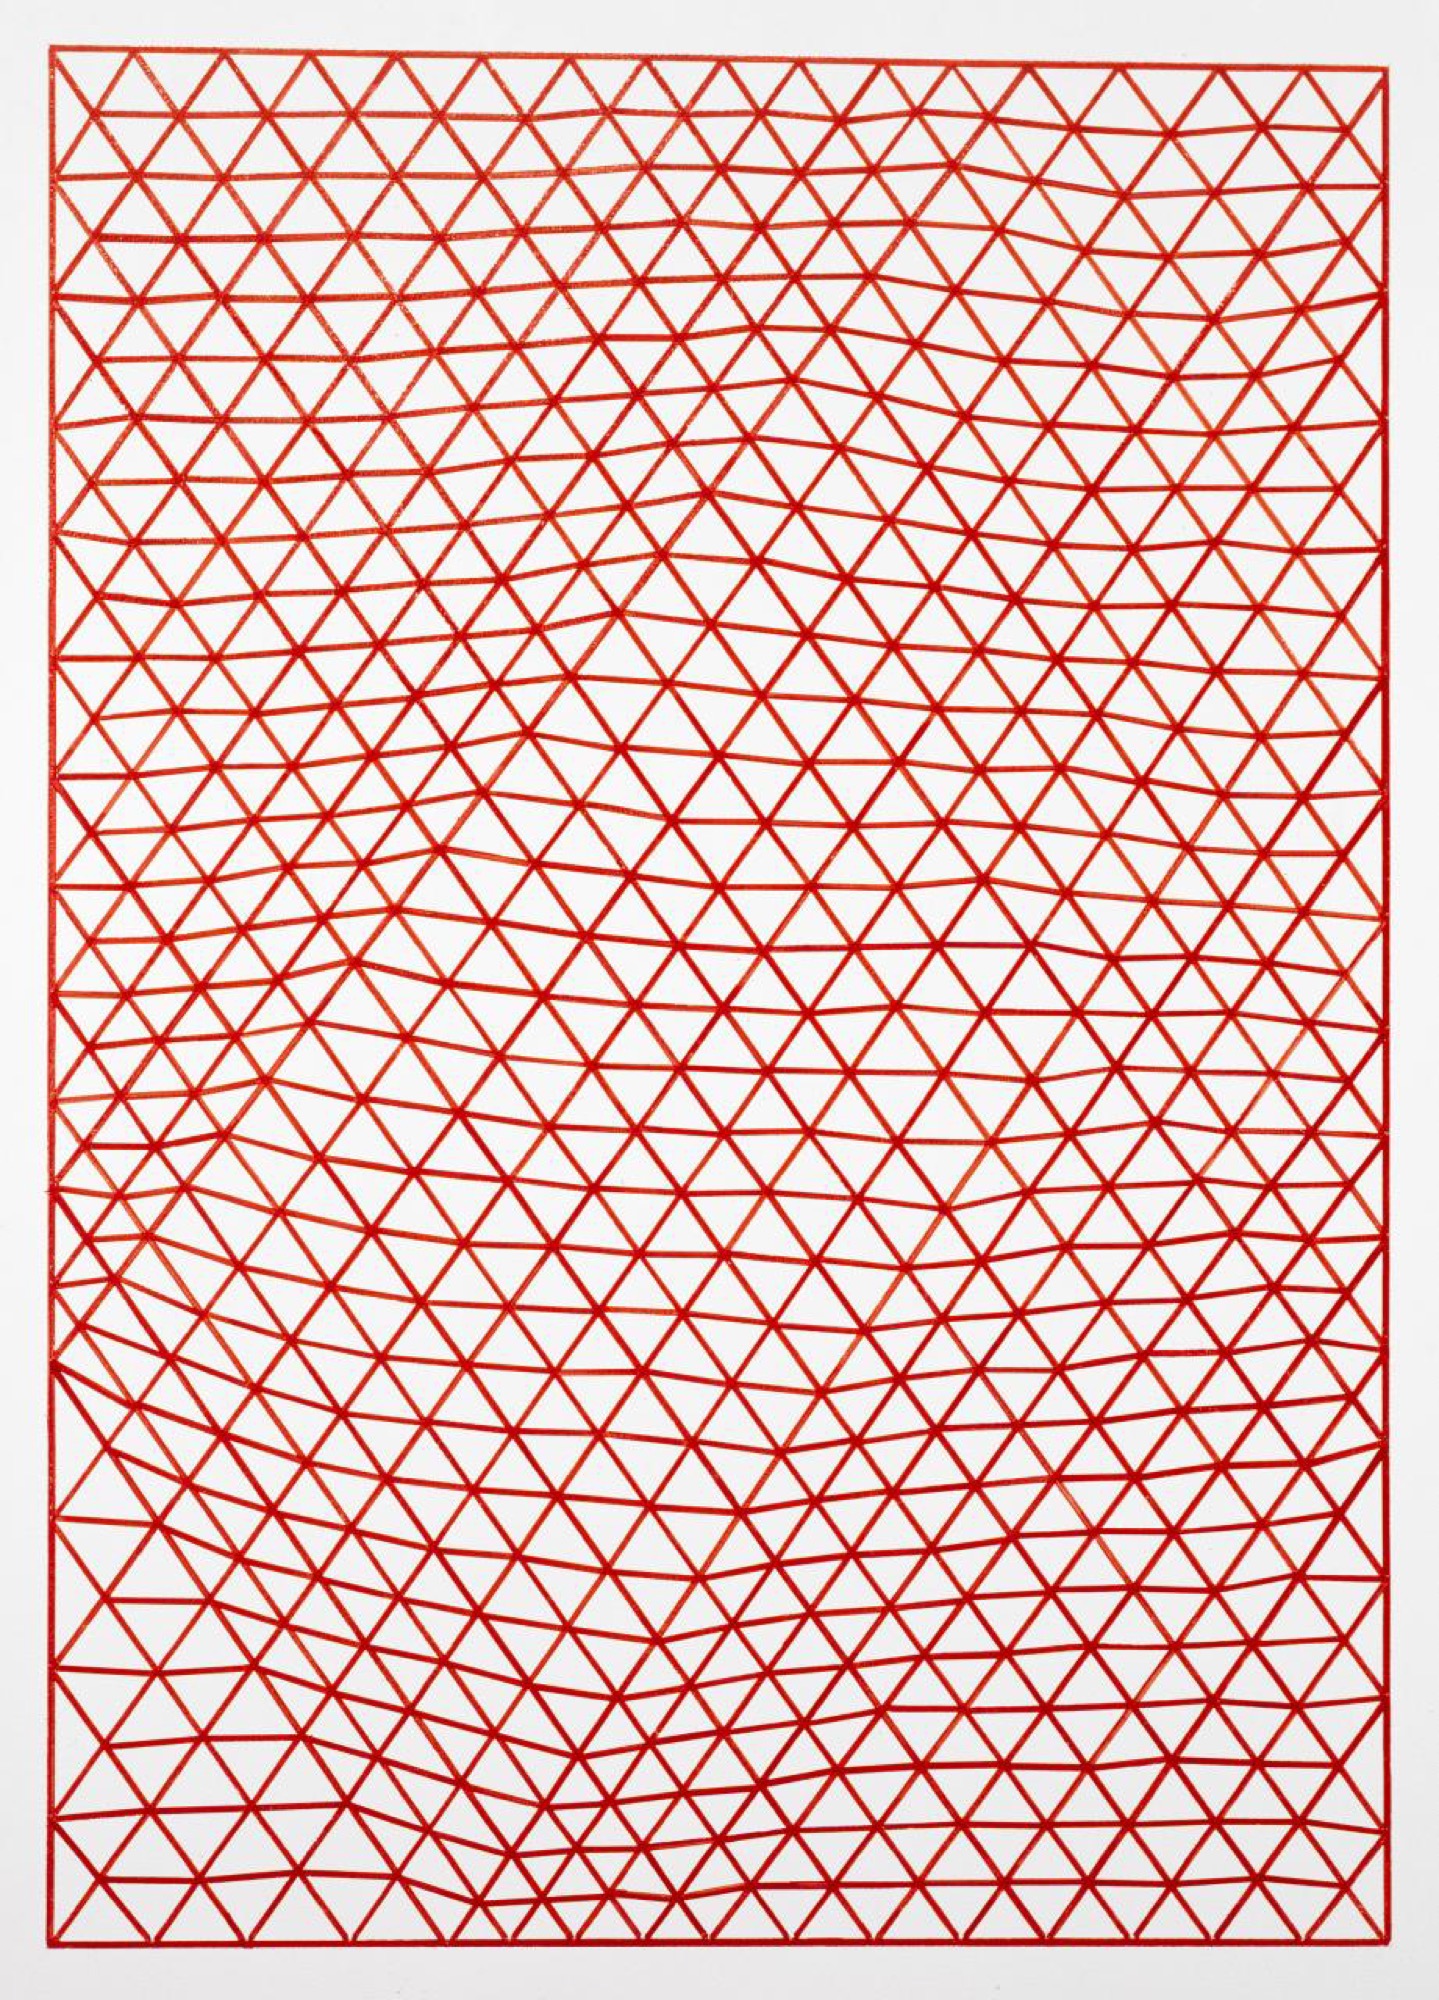 Kerrie Poliness, <em>Red matter wall drawing #3 instruction book</em>, 1994, artist book, ed. 5/10, National Gallery of Victoria, Margaret Steward Endowment, 1996 (c)Kerrie Poliness.